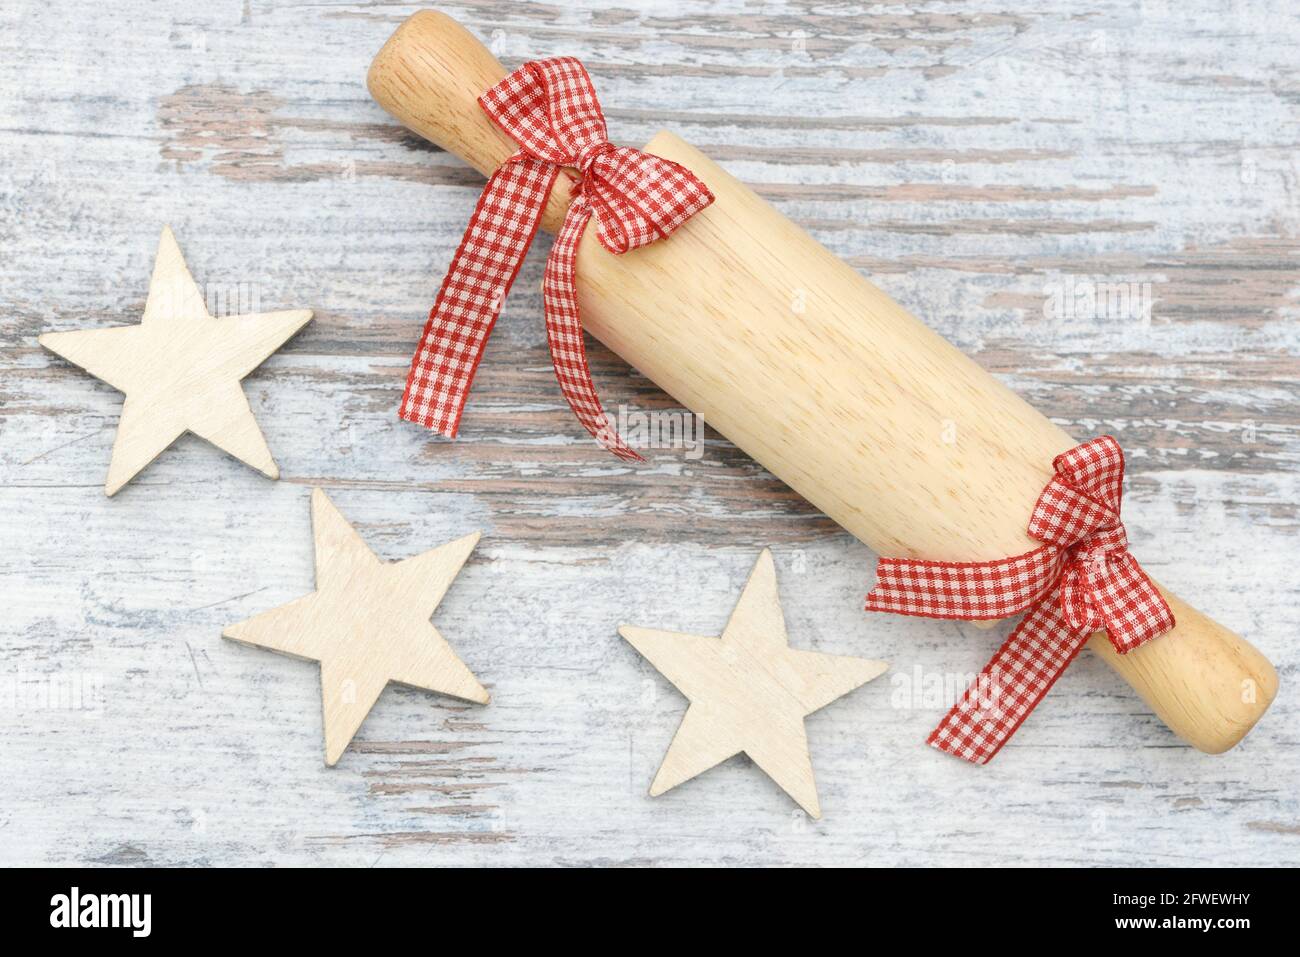 rolling pin and stars lying on wood Stock Photo